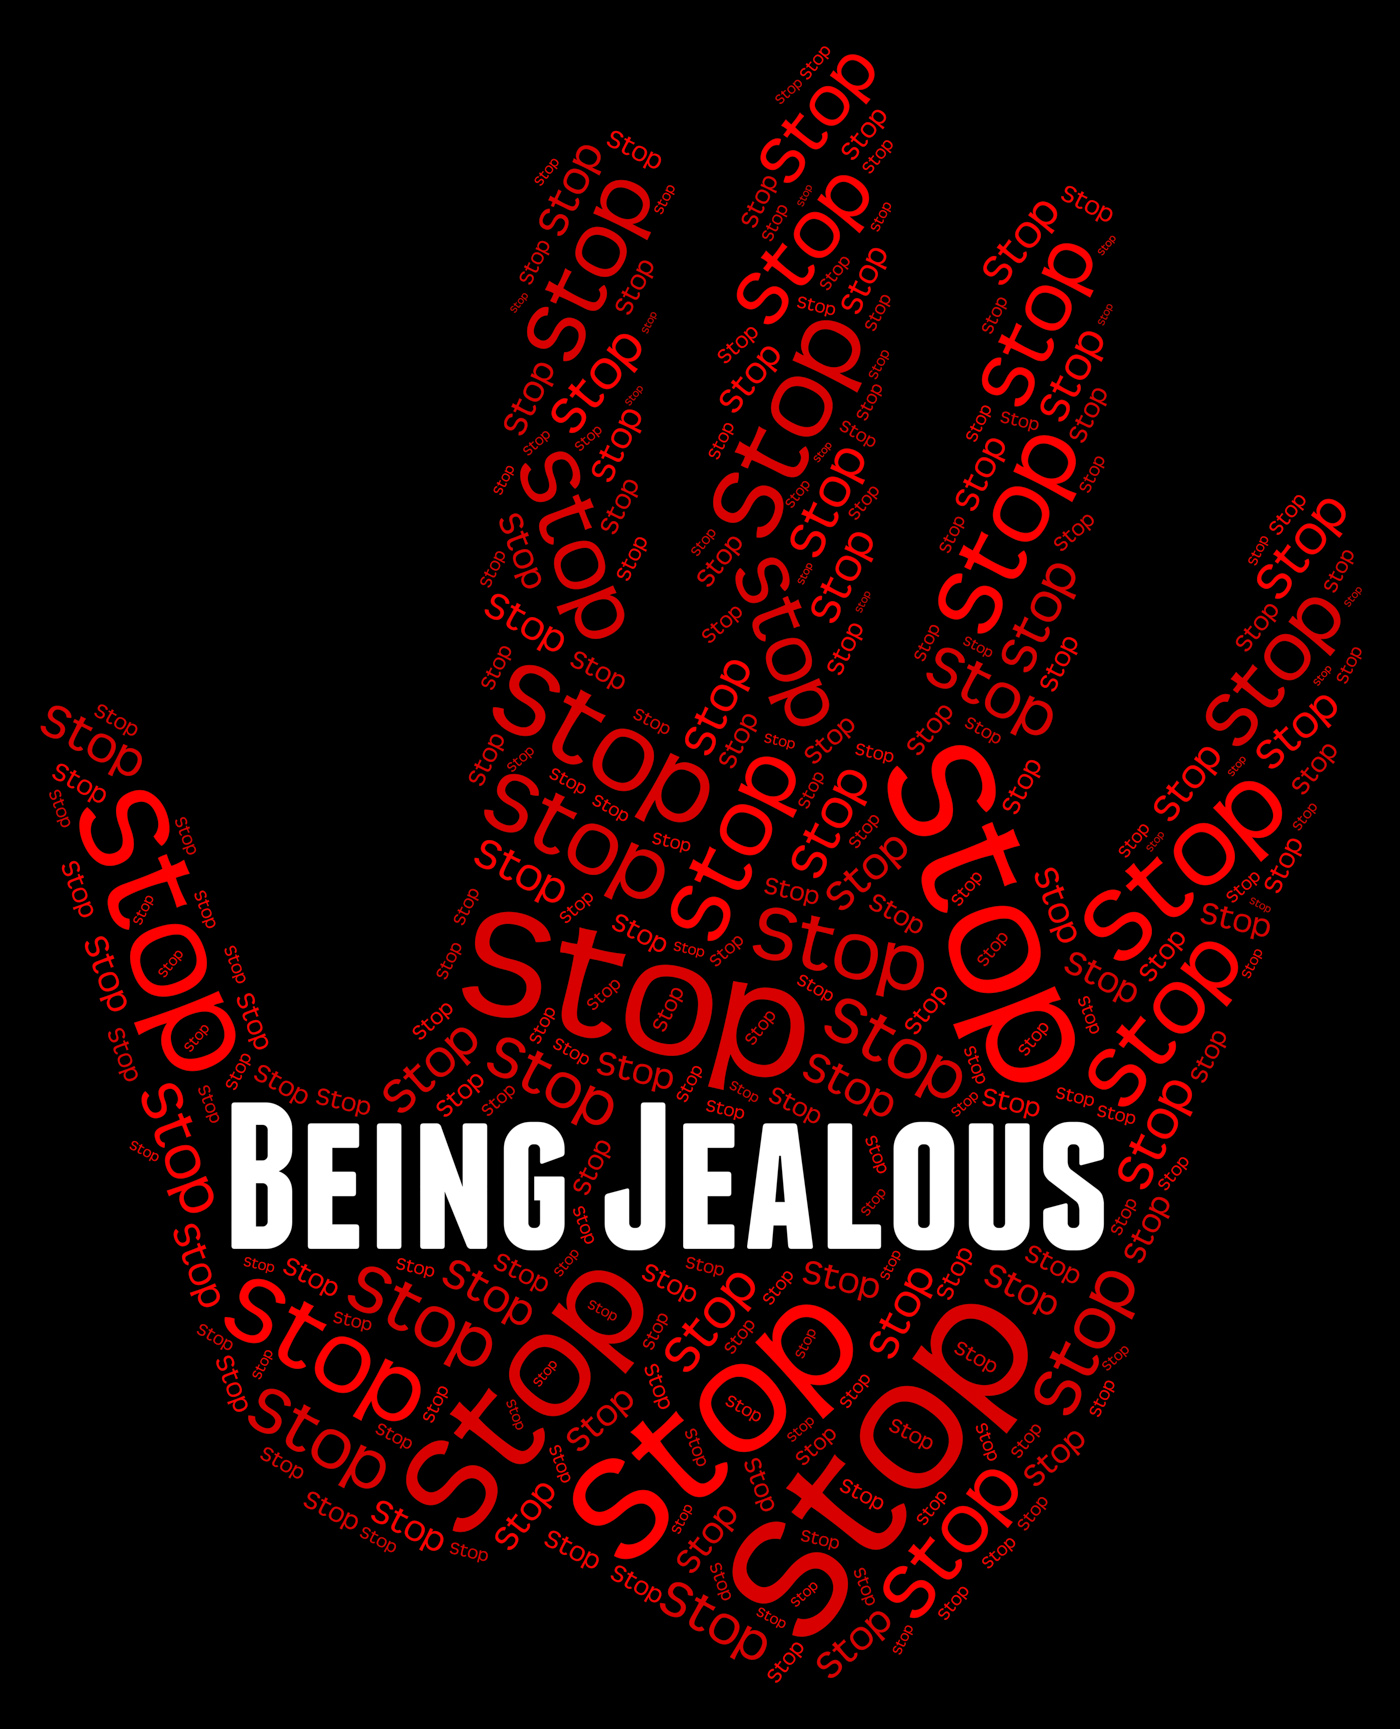 Stop being jealous indicates warning sign and bitter photo